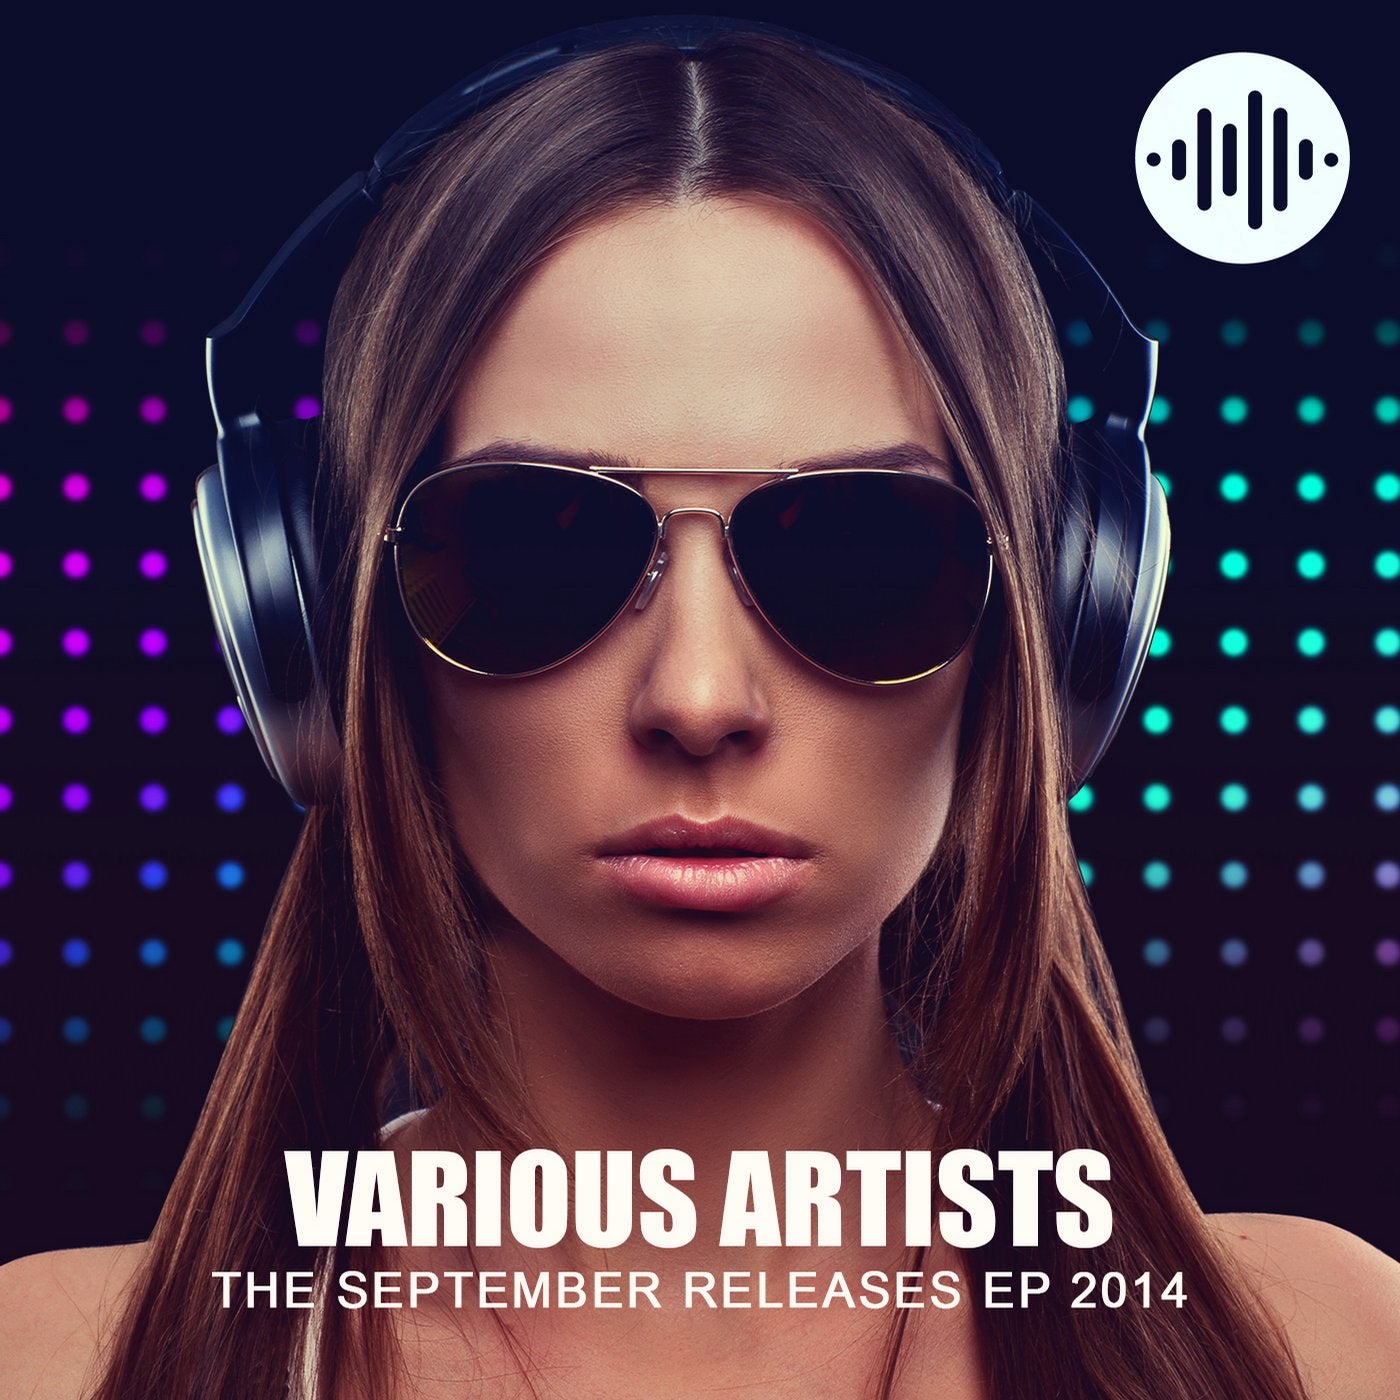 The September Releases EP 2014